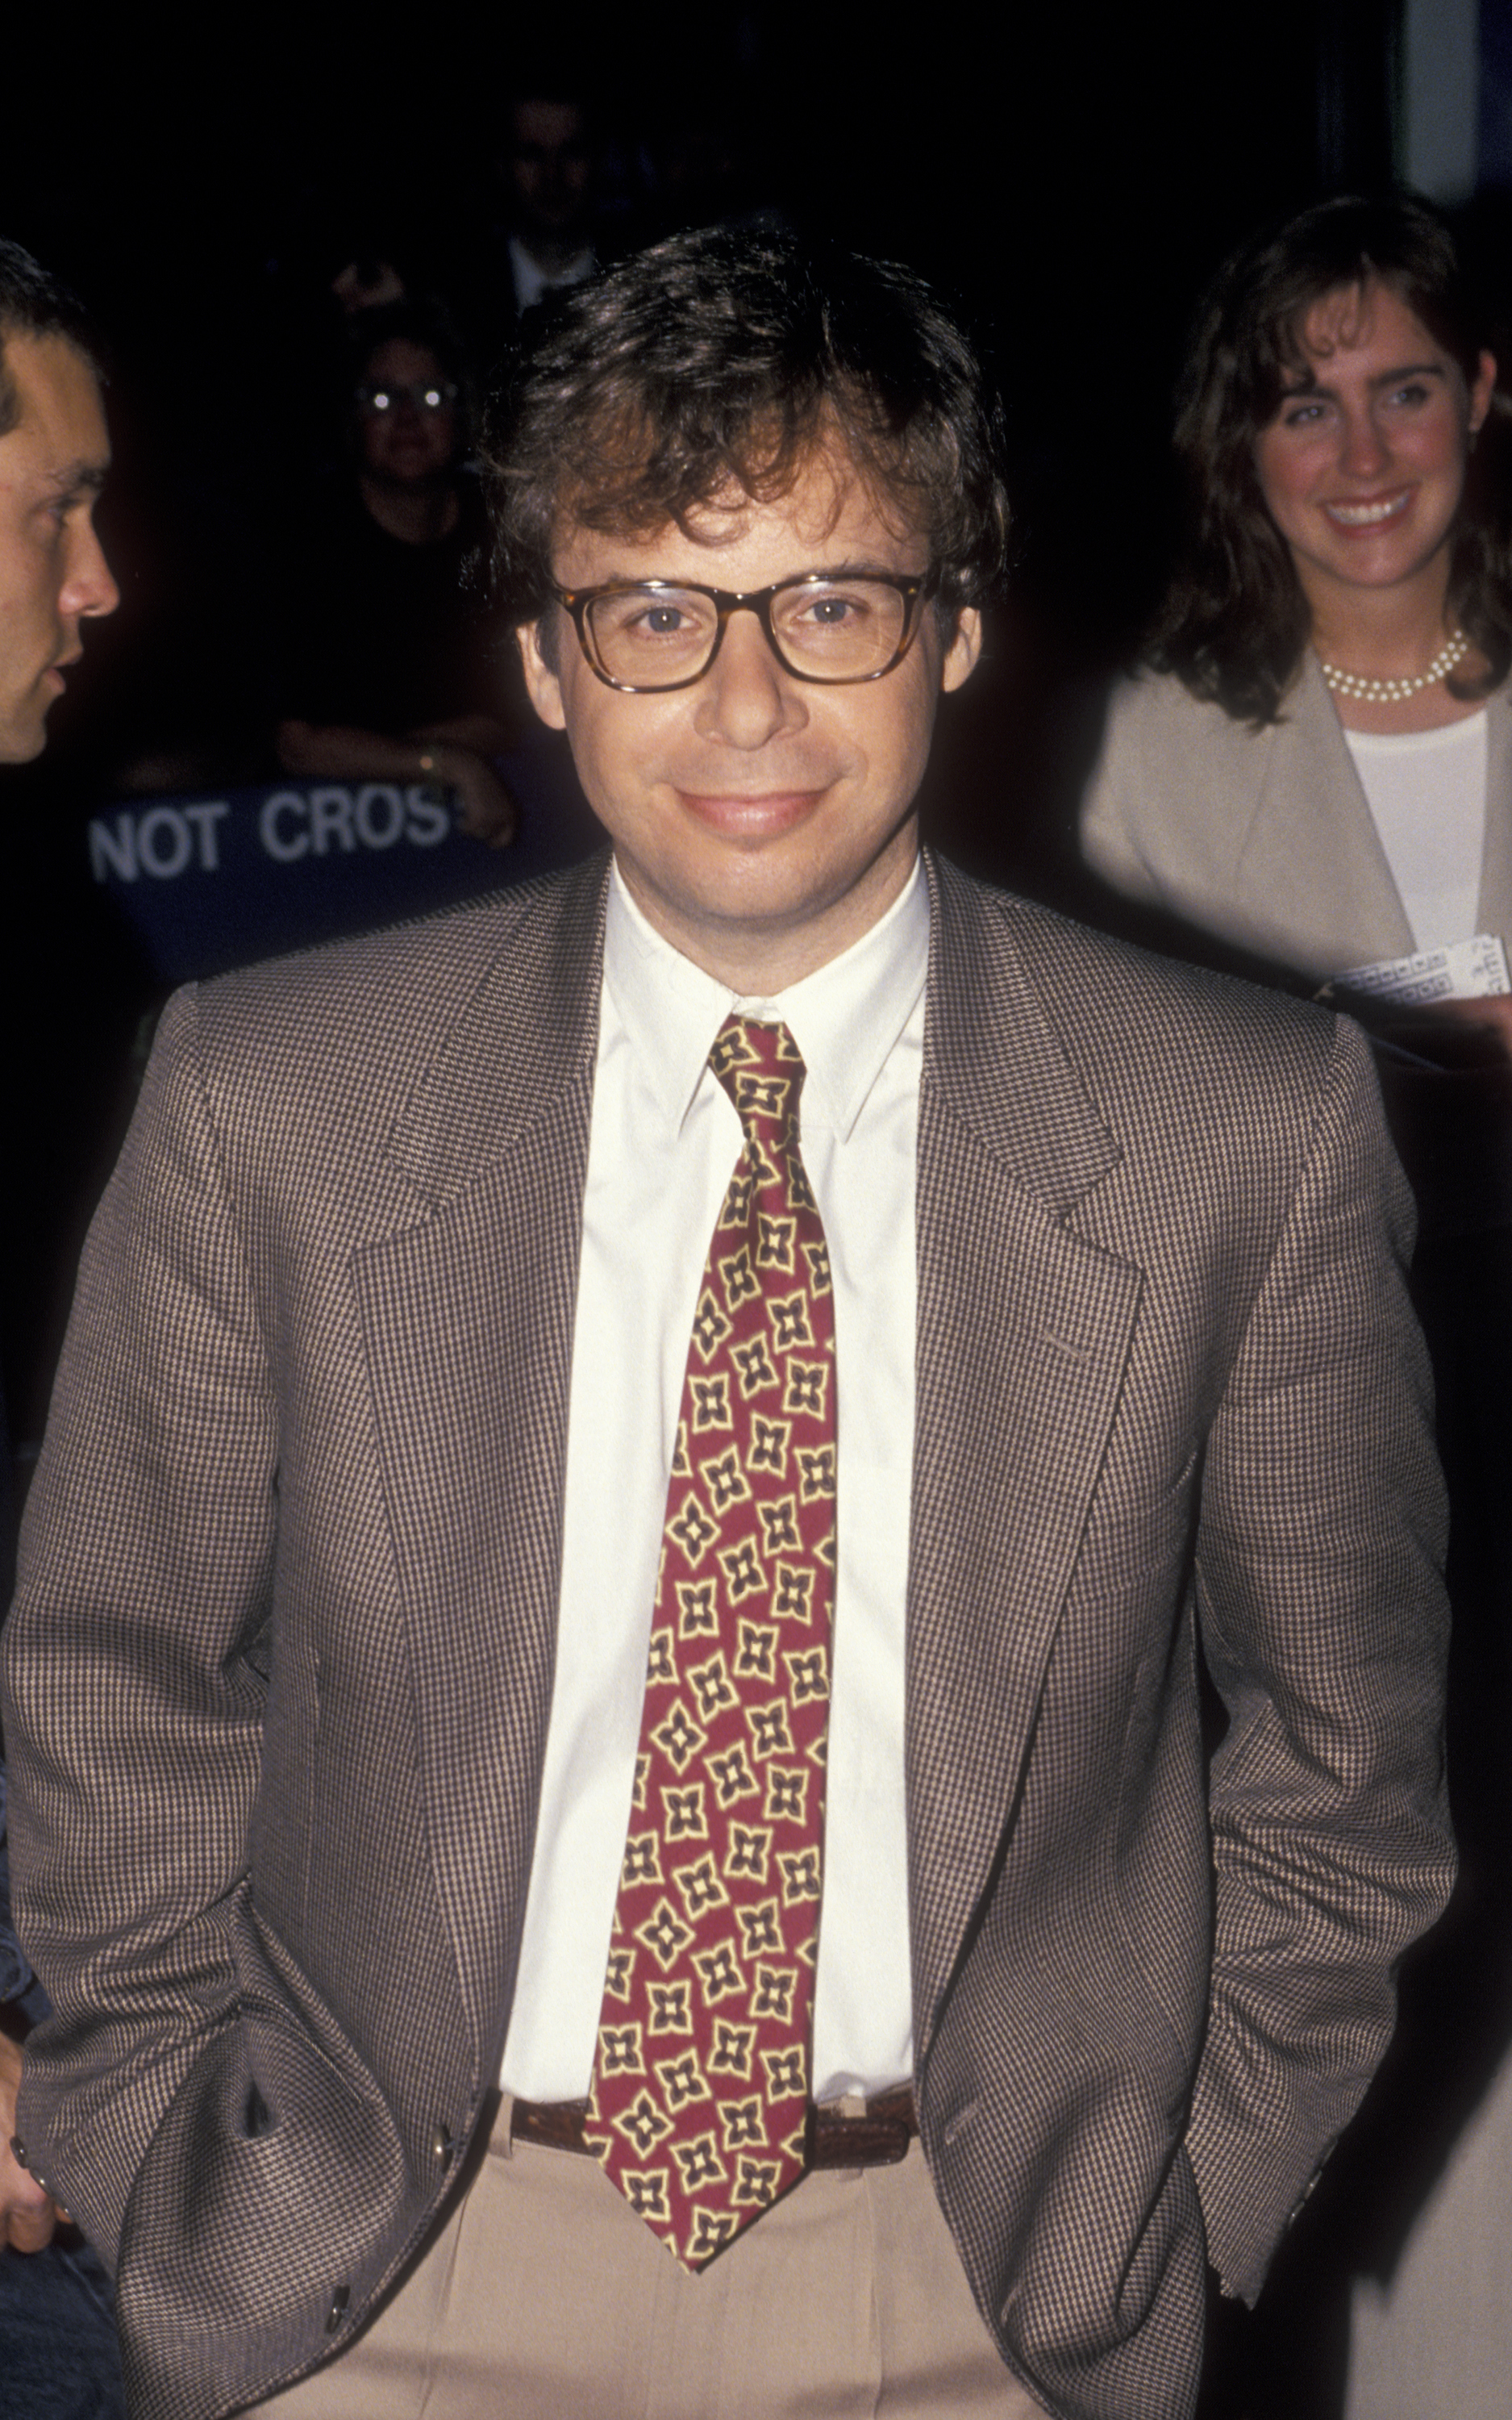 Rick Moranis attends the premiere of "The Flintstones," 1994 | Source: Getty Images